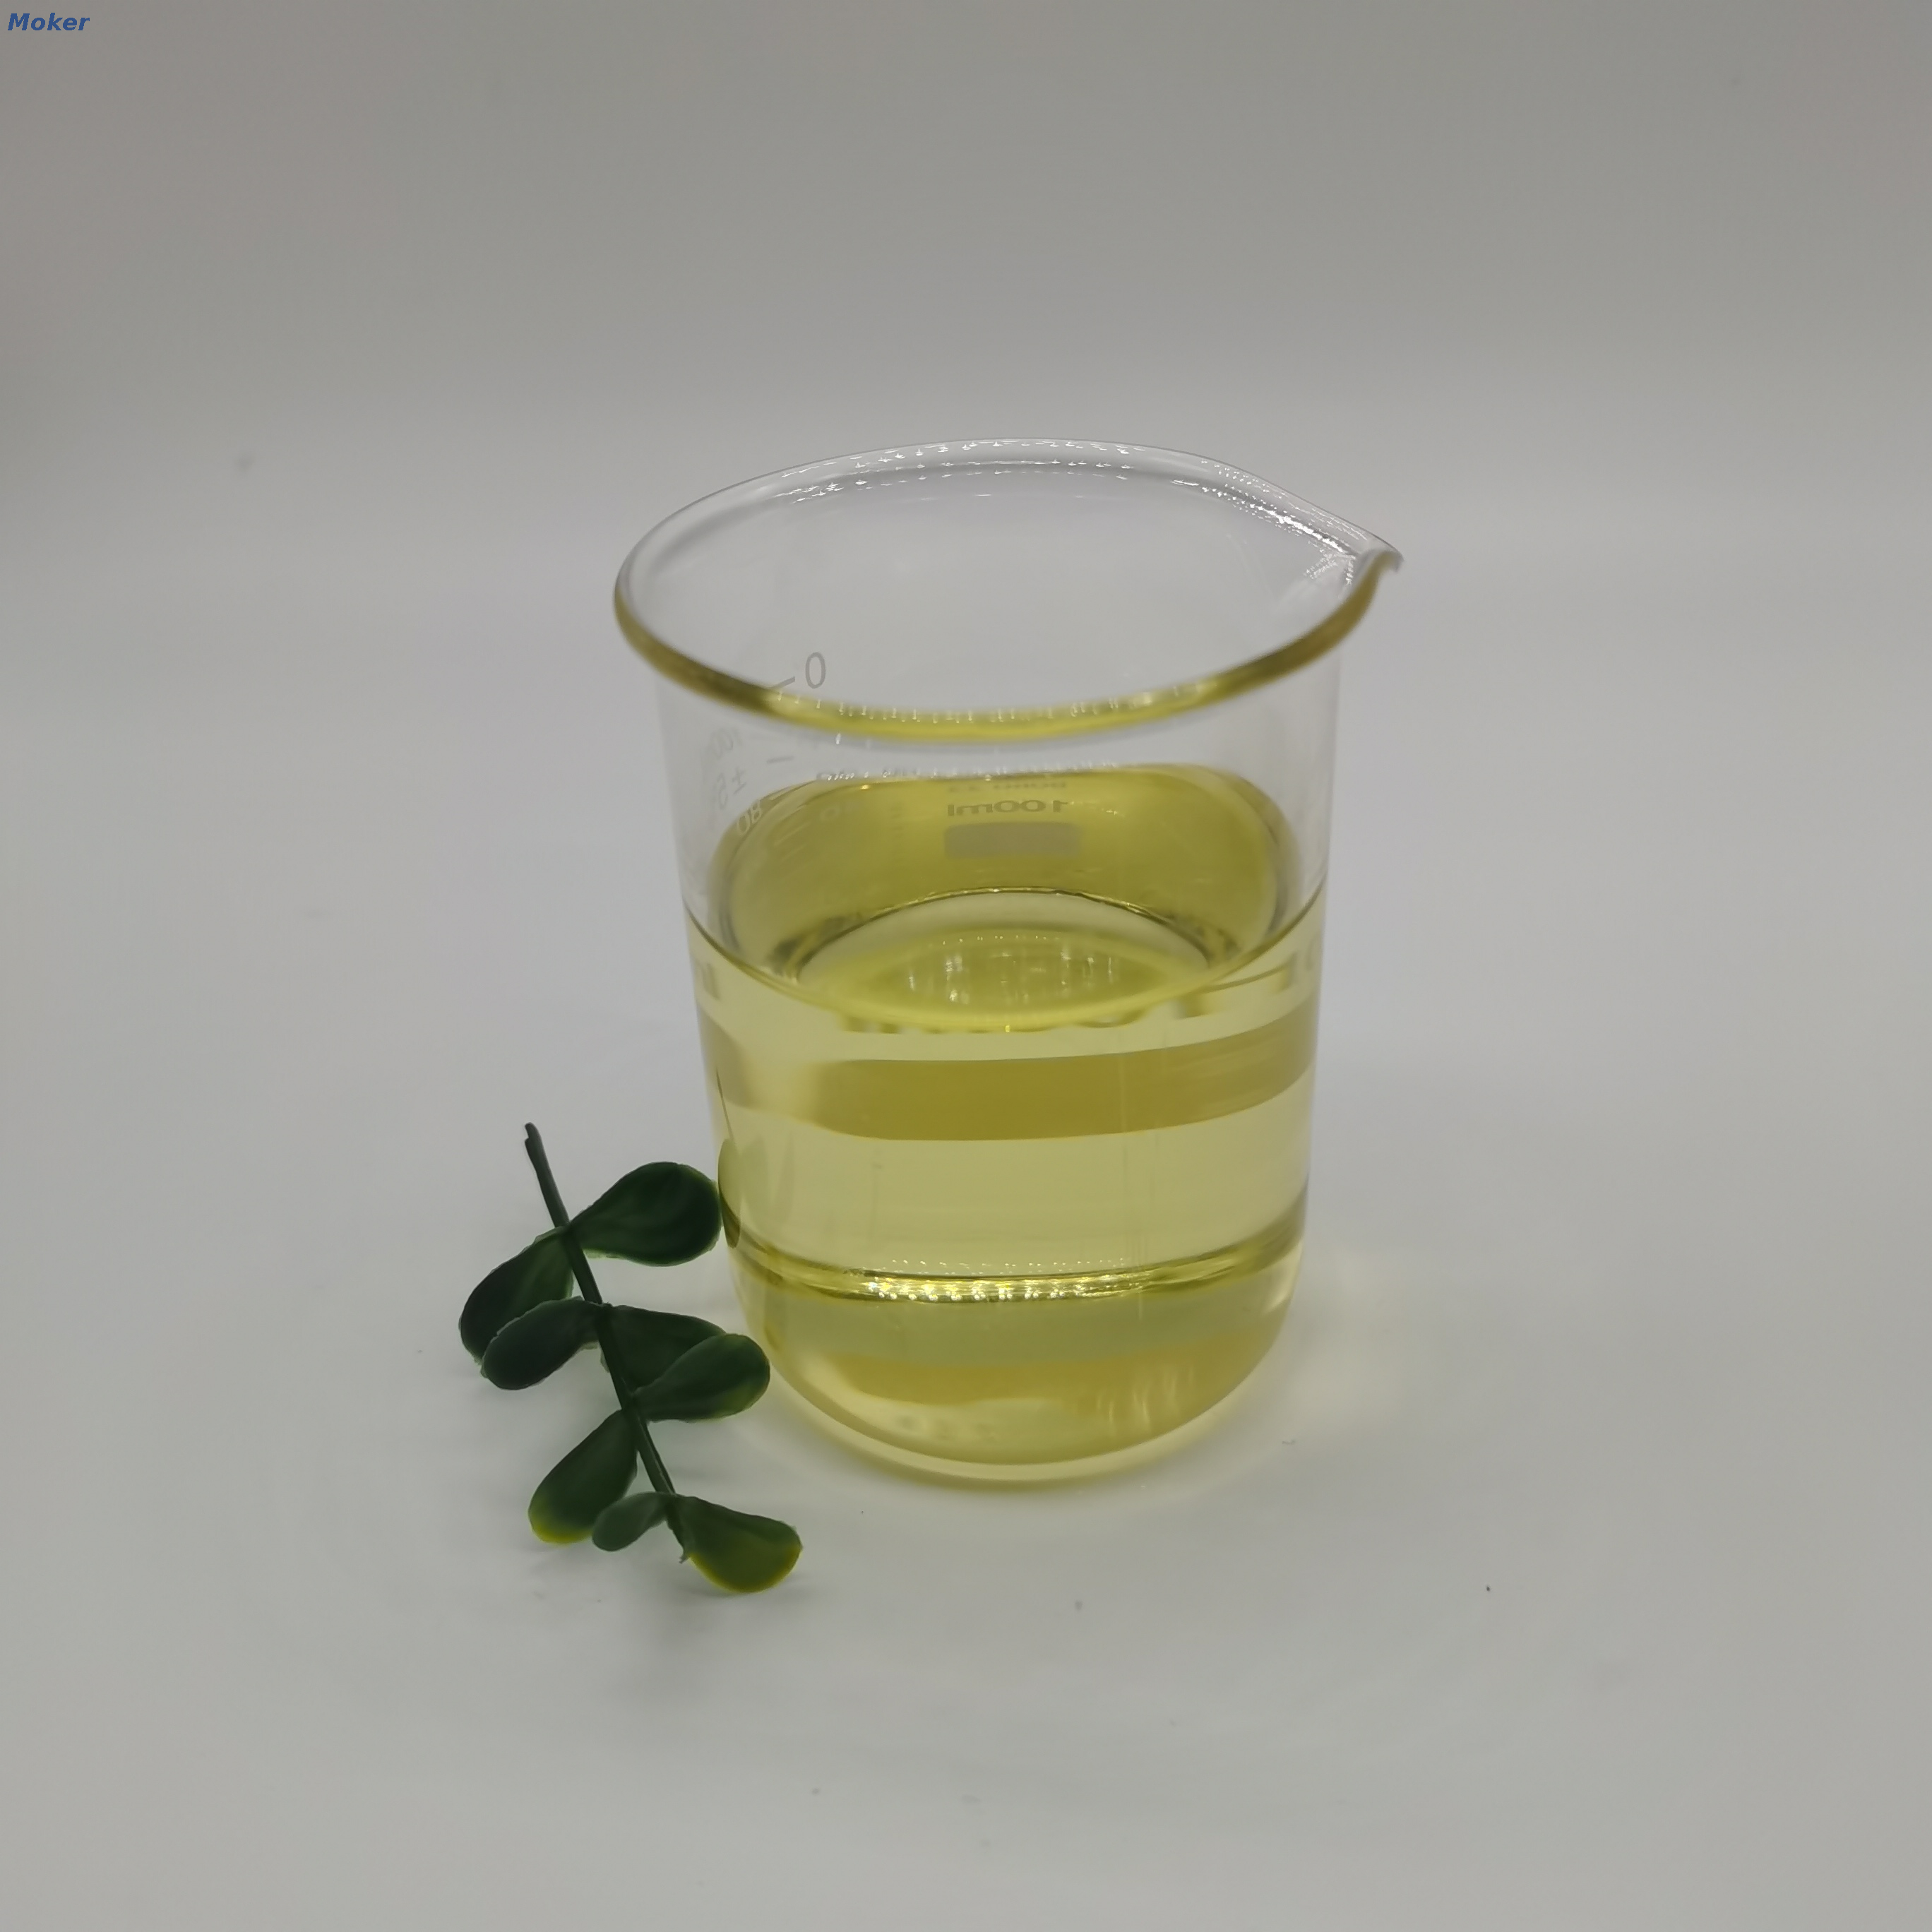 High purity 4-Chloro-1-methylpiperidine CAS:5570-77-4 Used in The Synthesis of Antihistamines in stock with safe delivery